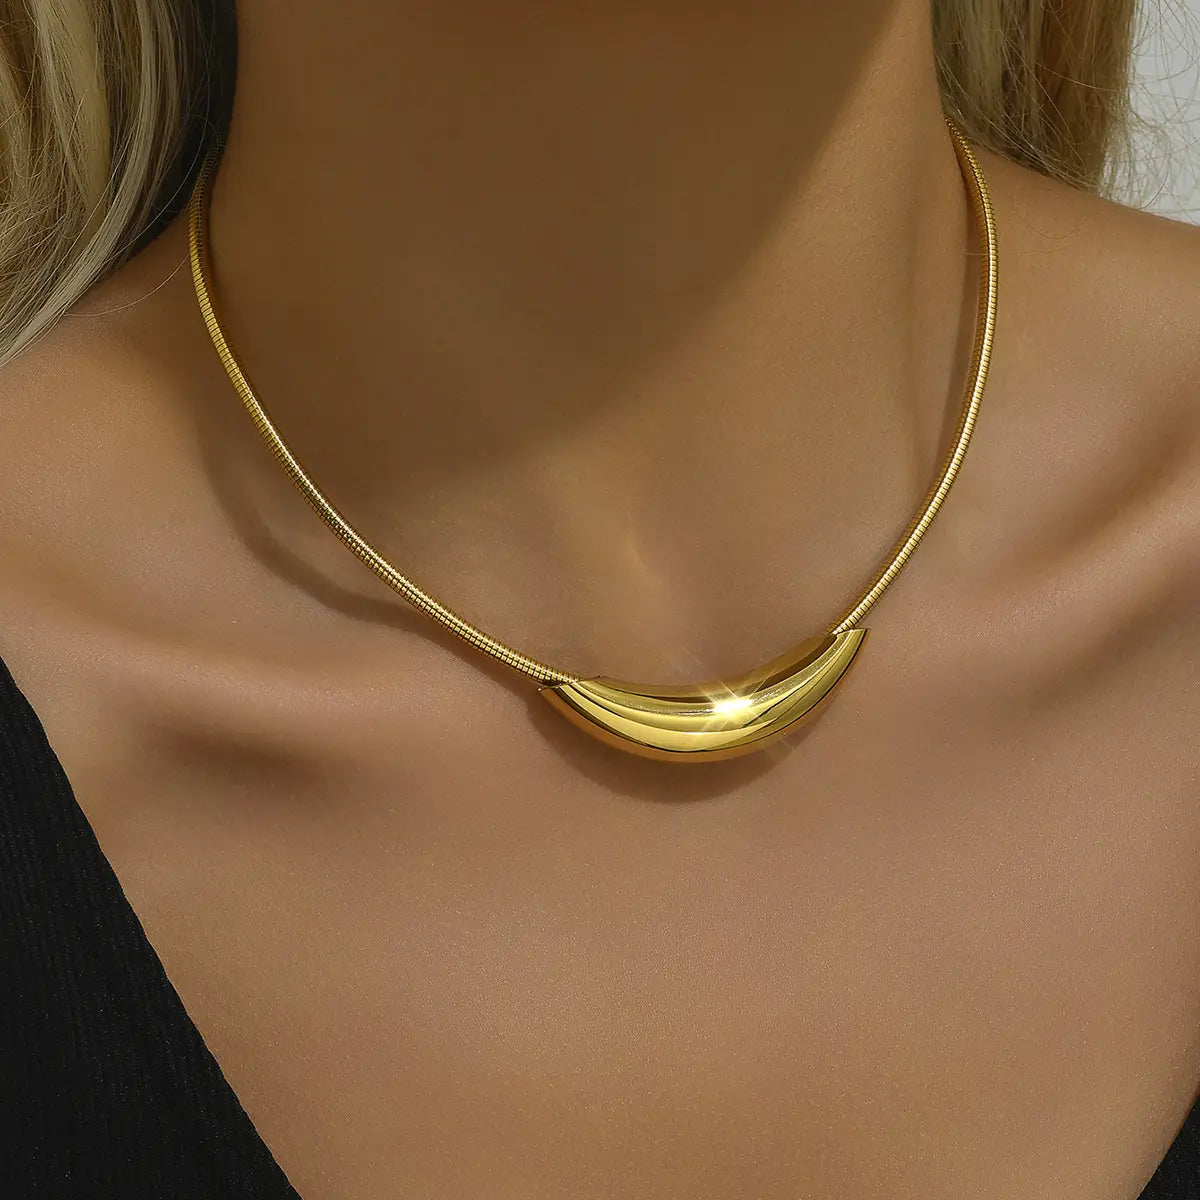 Steel choker necklace with gold detail-NE487